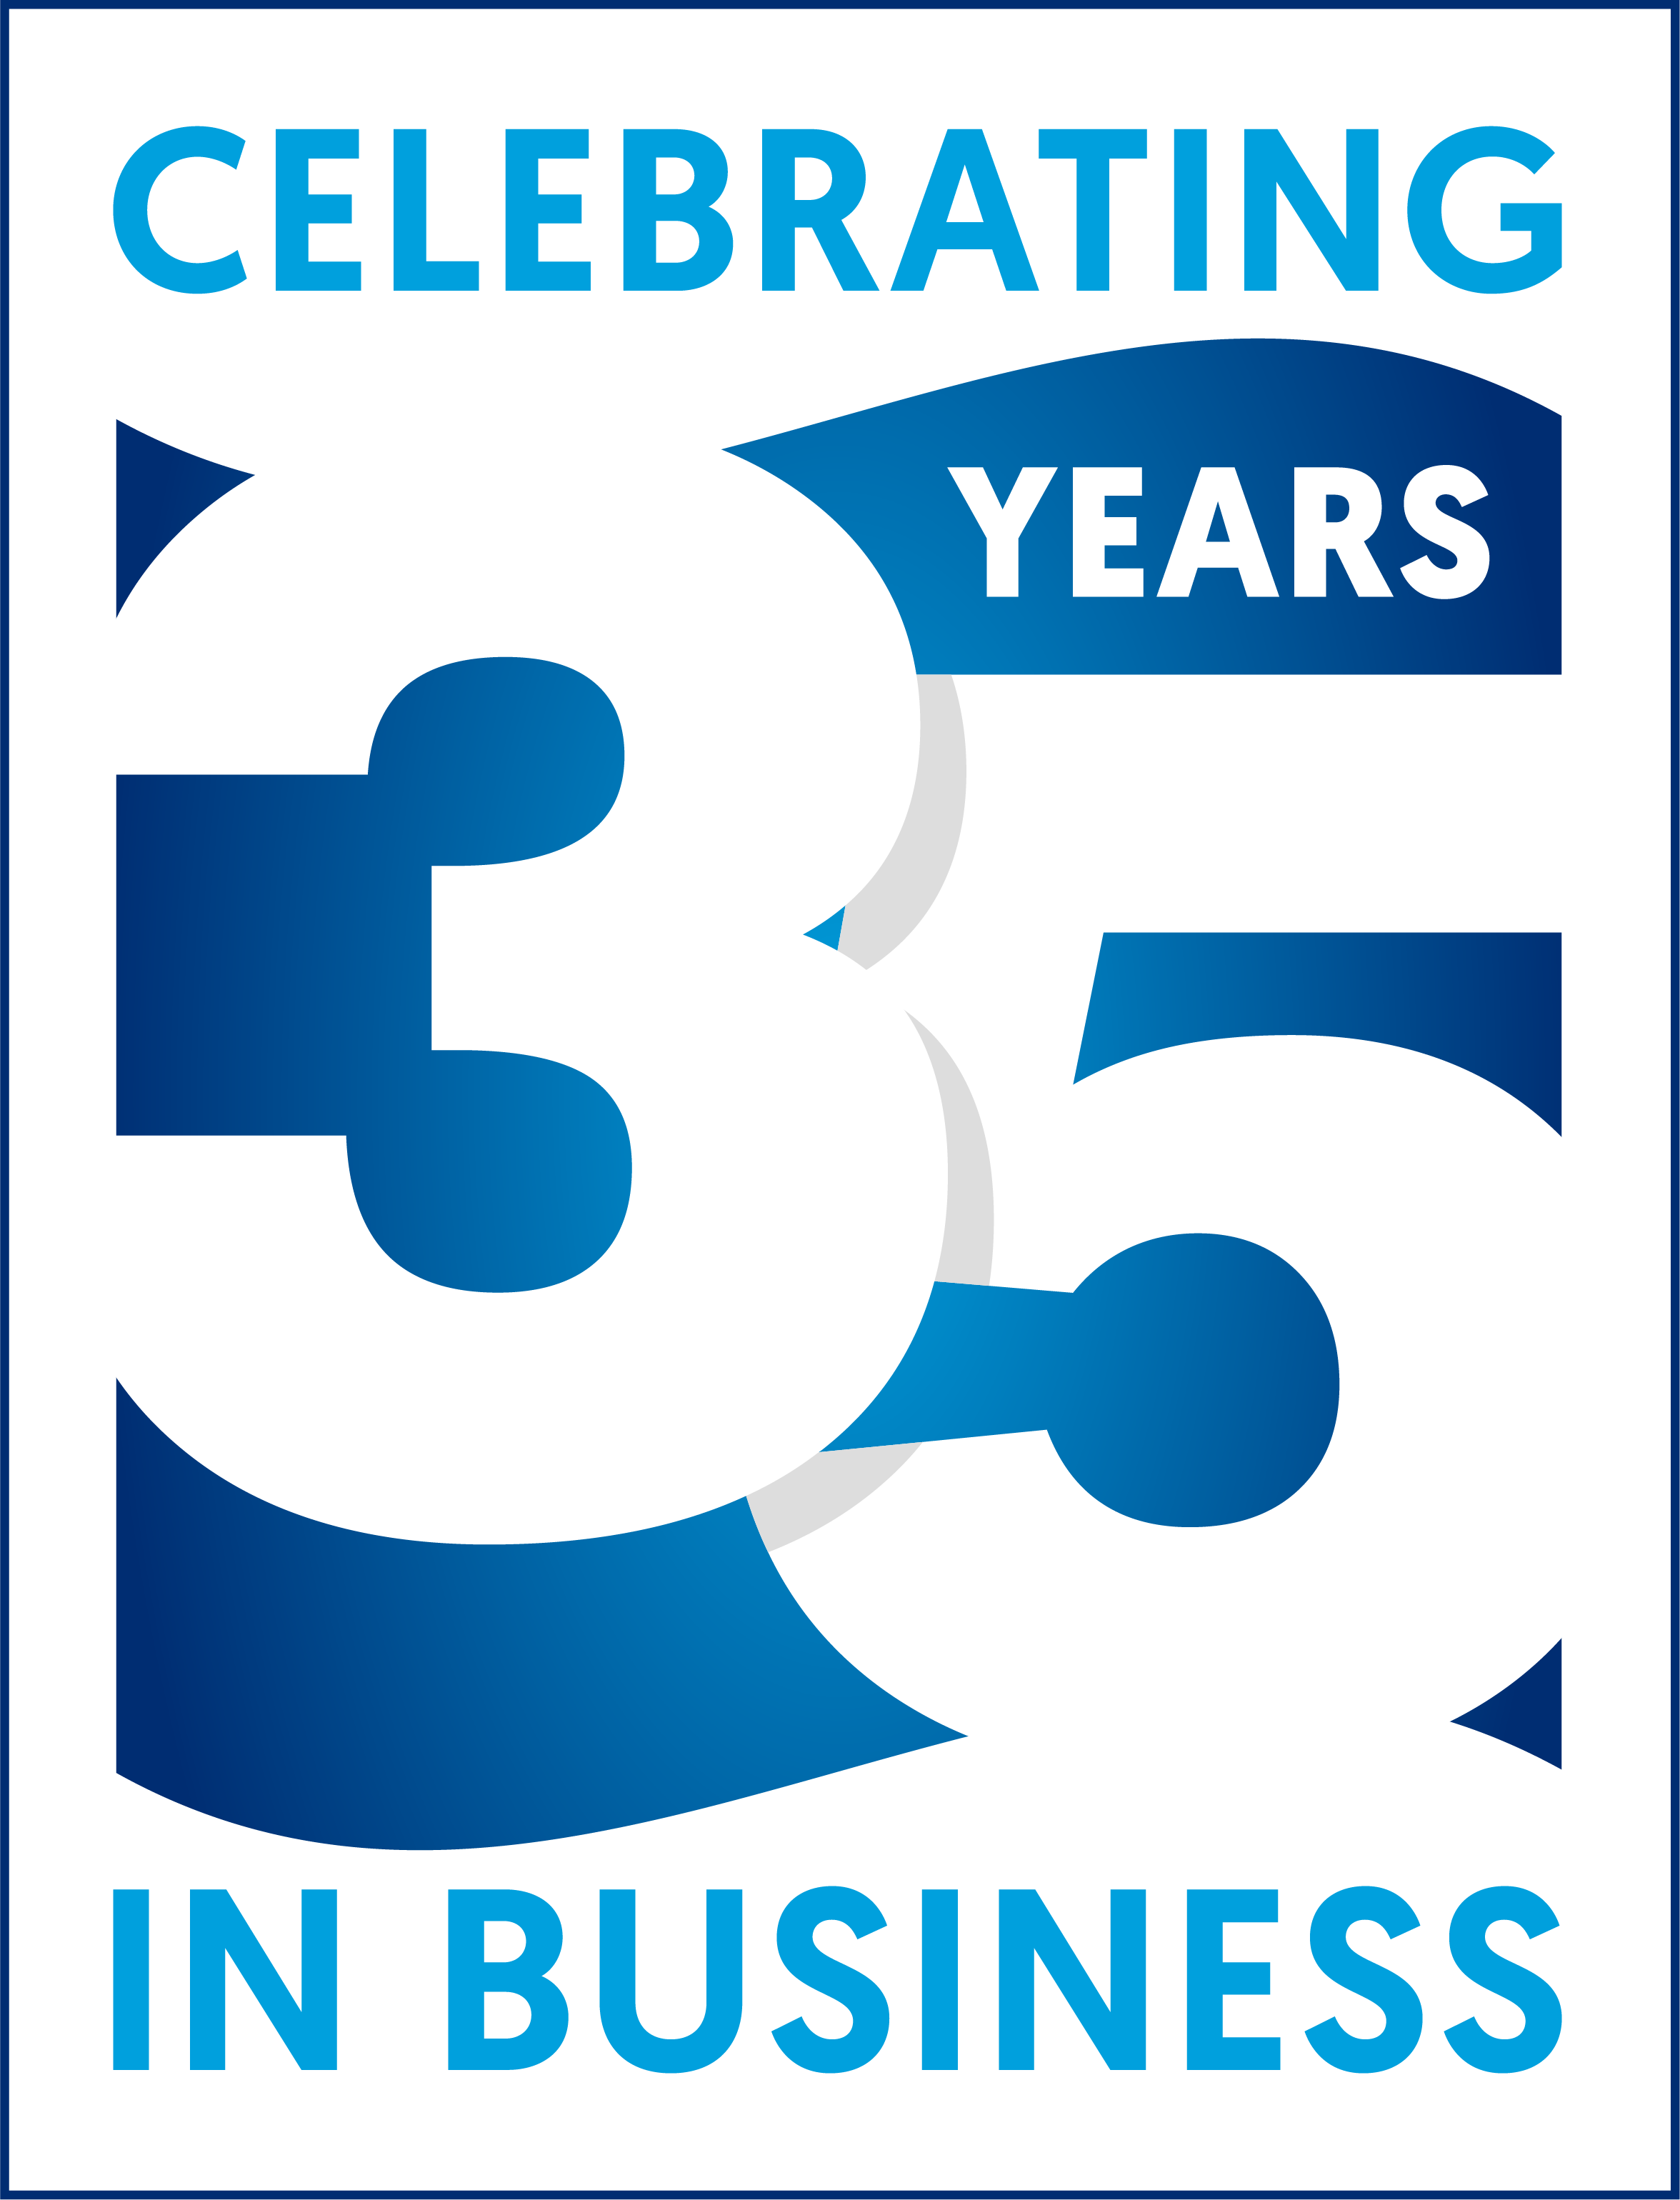 Matrix Imaging Solutions Celebrates 35 Years of Connecting People Through Reliable Communications